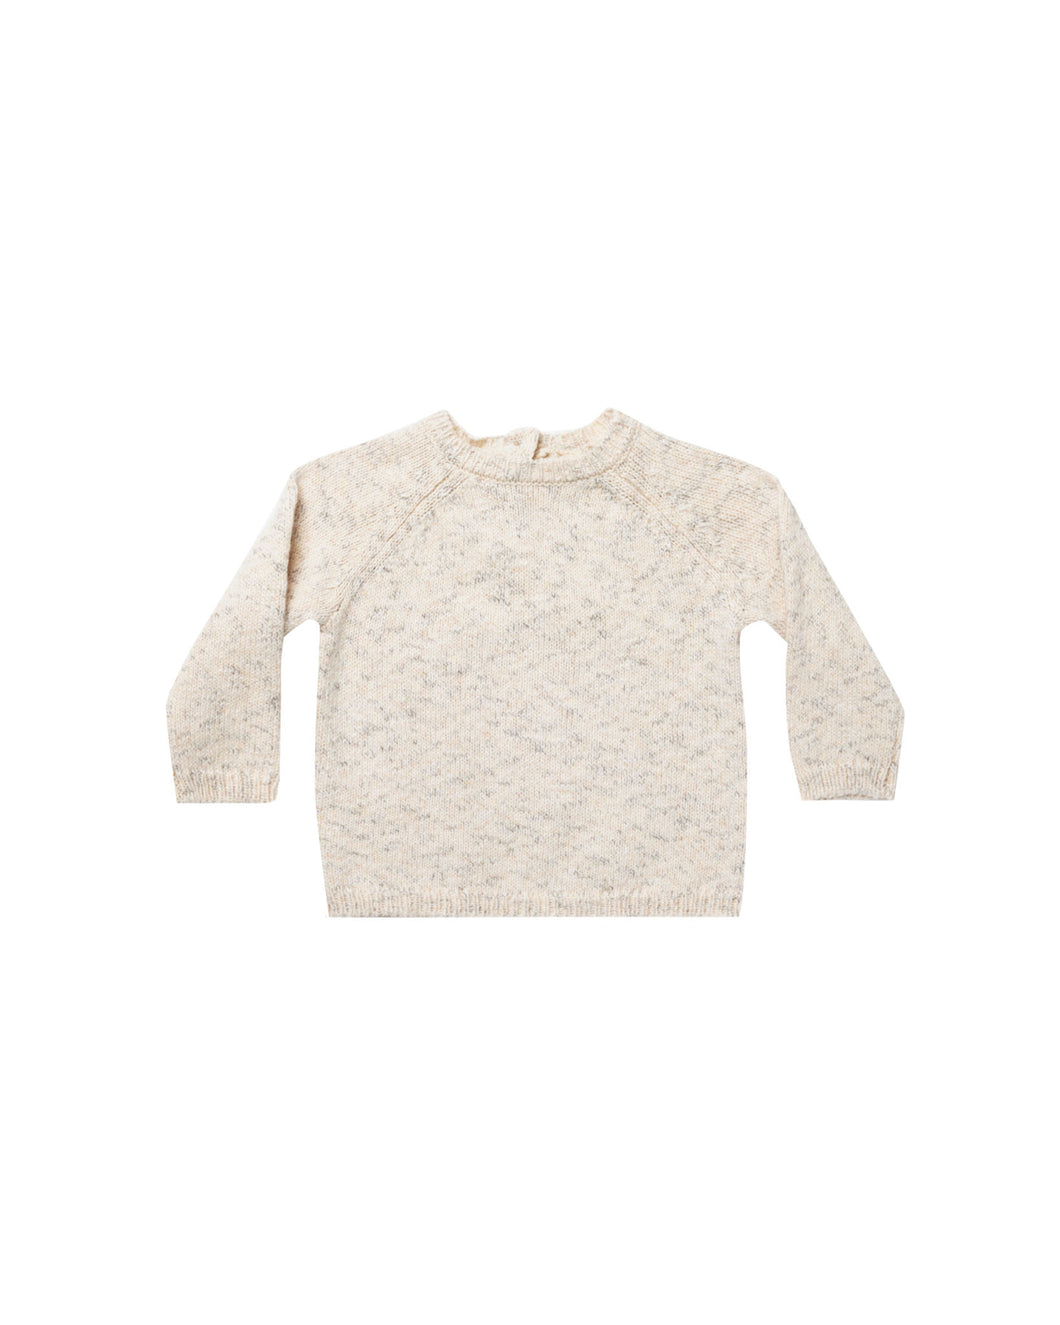 Natural Speckled Knit Sweater